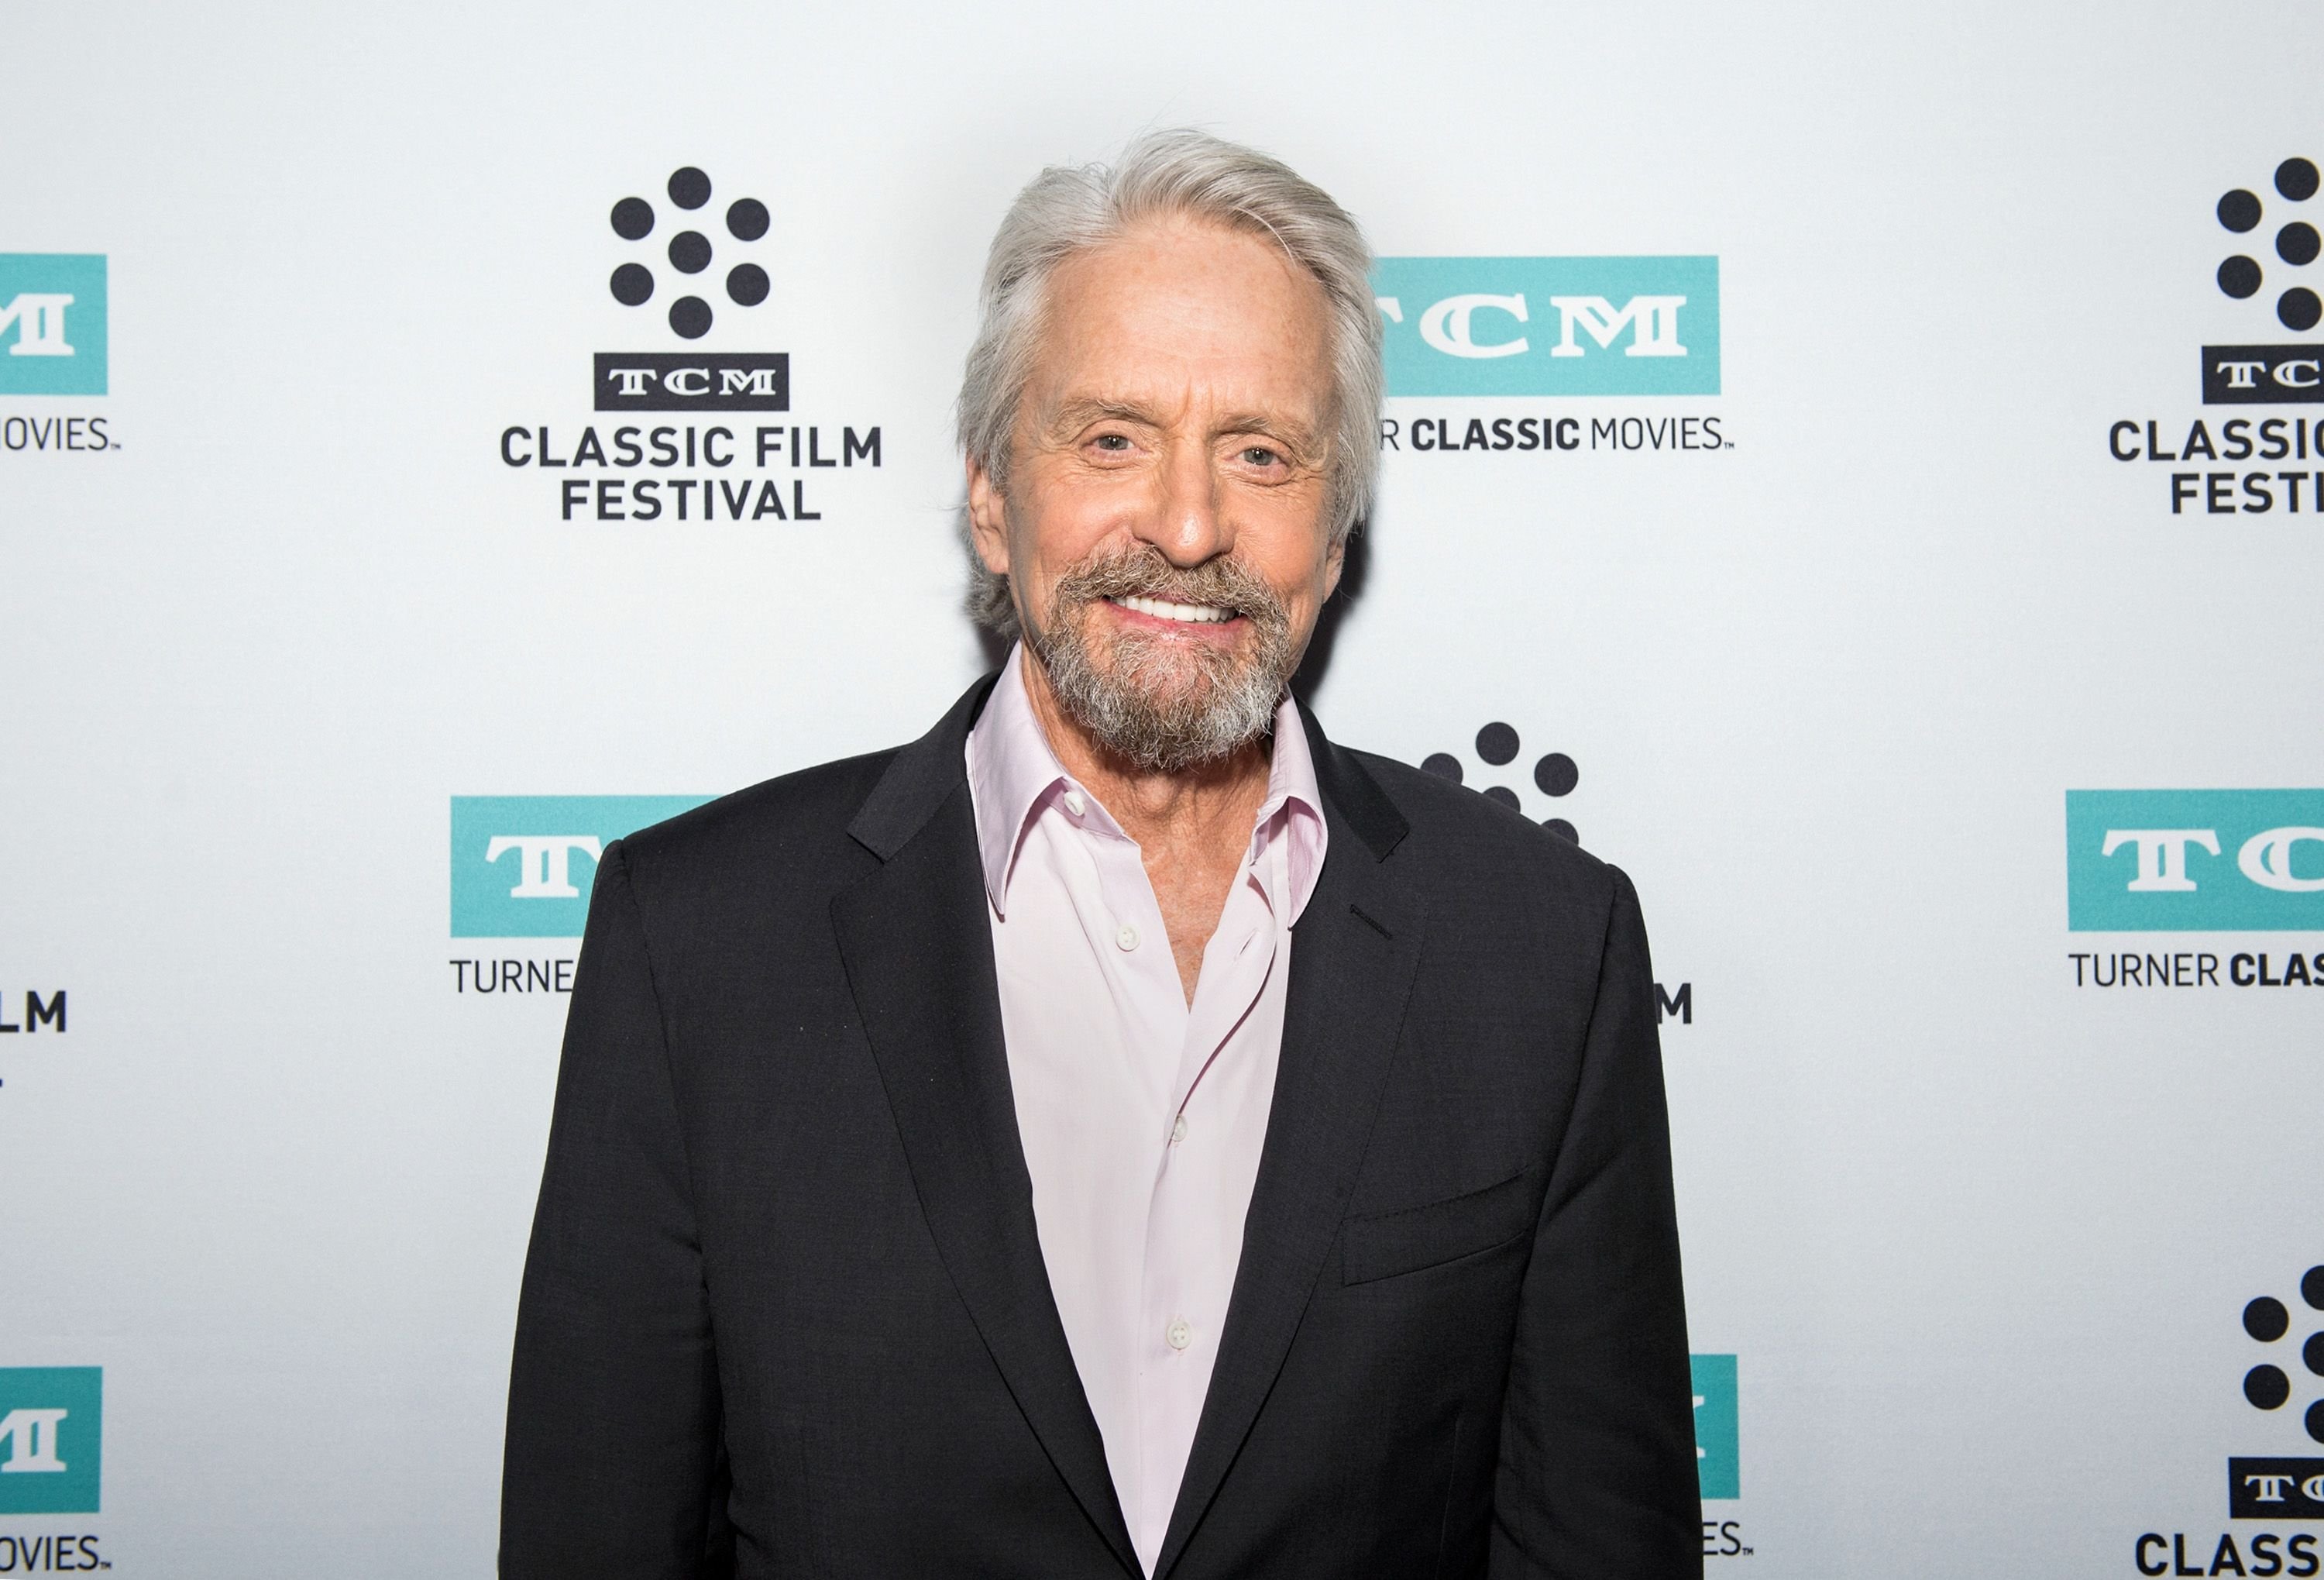 Actor Michael Douglas at the 2017 TCM Classic Film Festival on April 8, 2017 | Photo: Getty Images